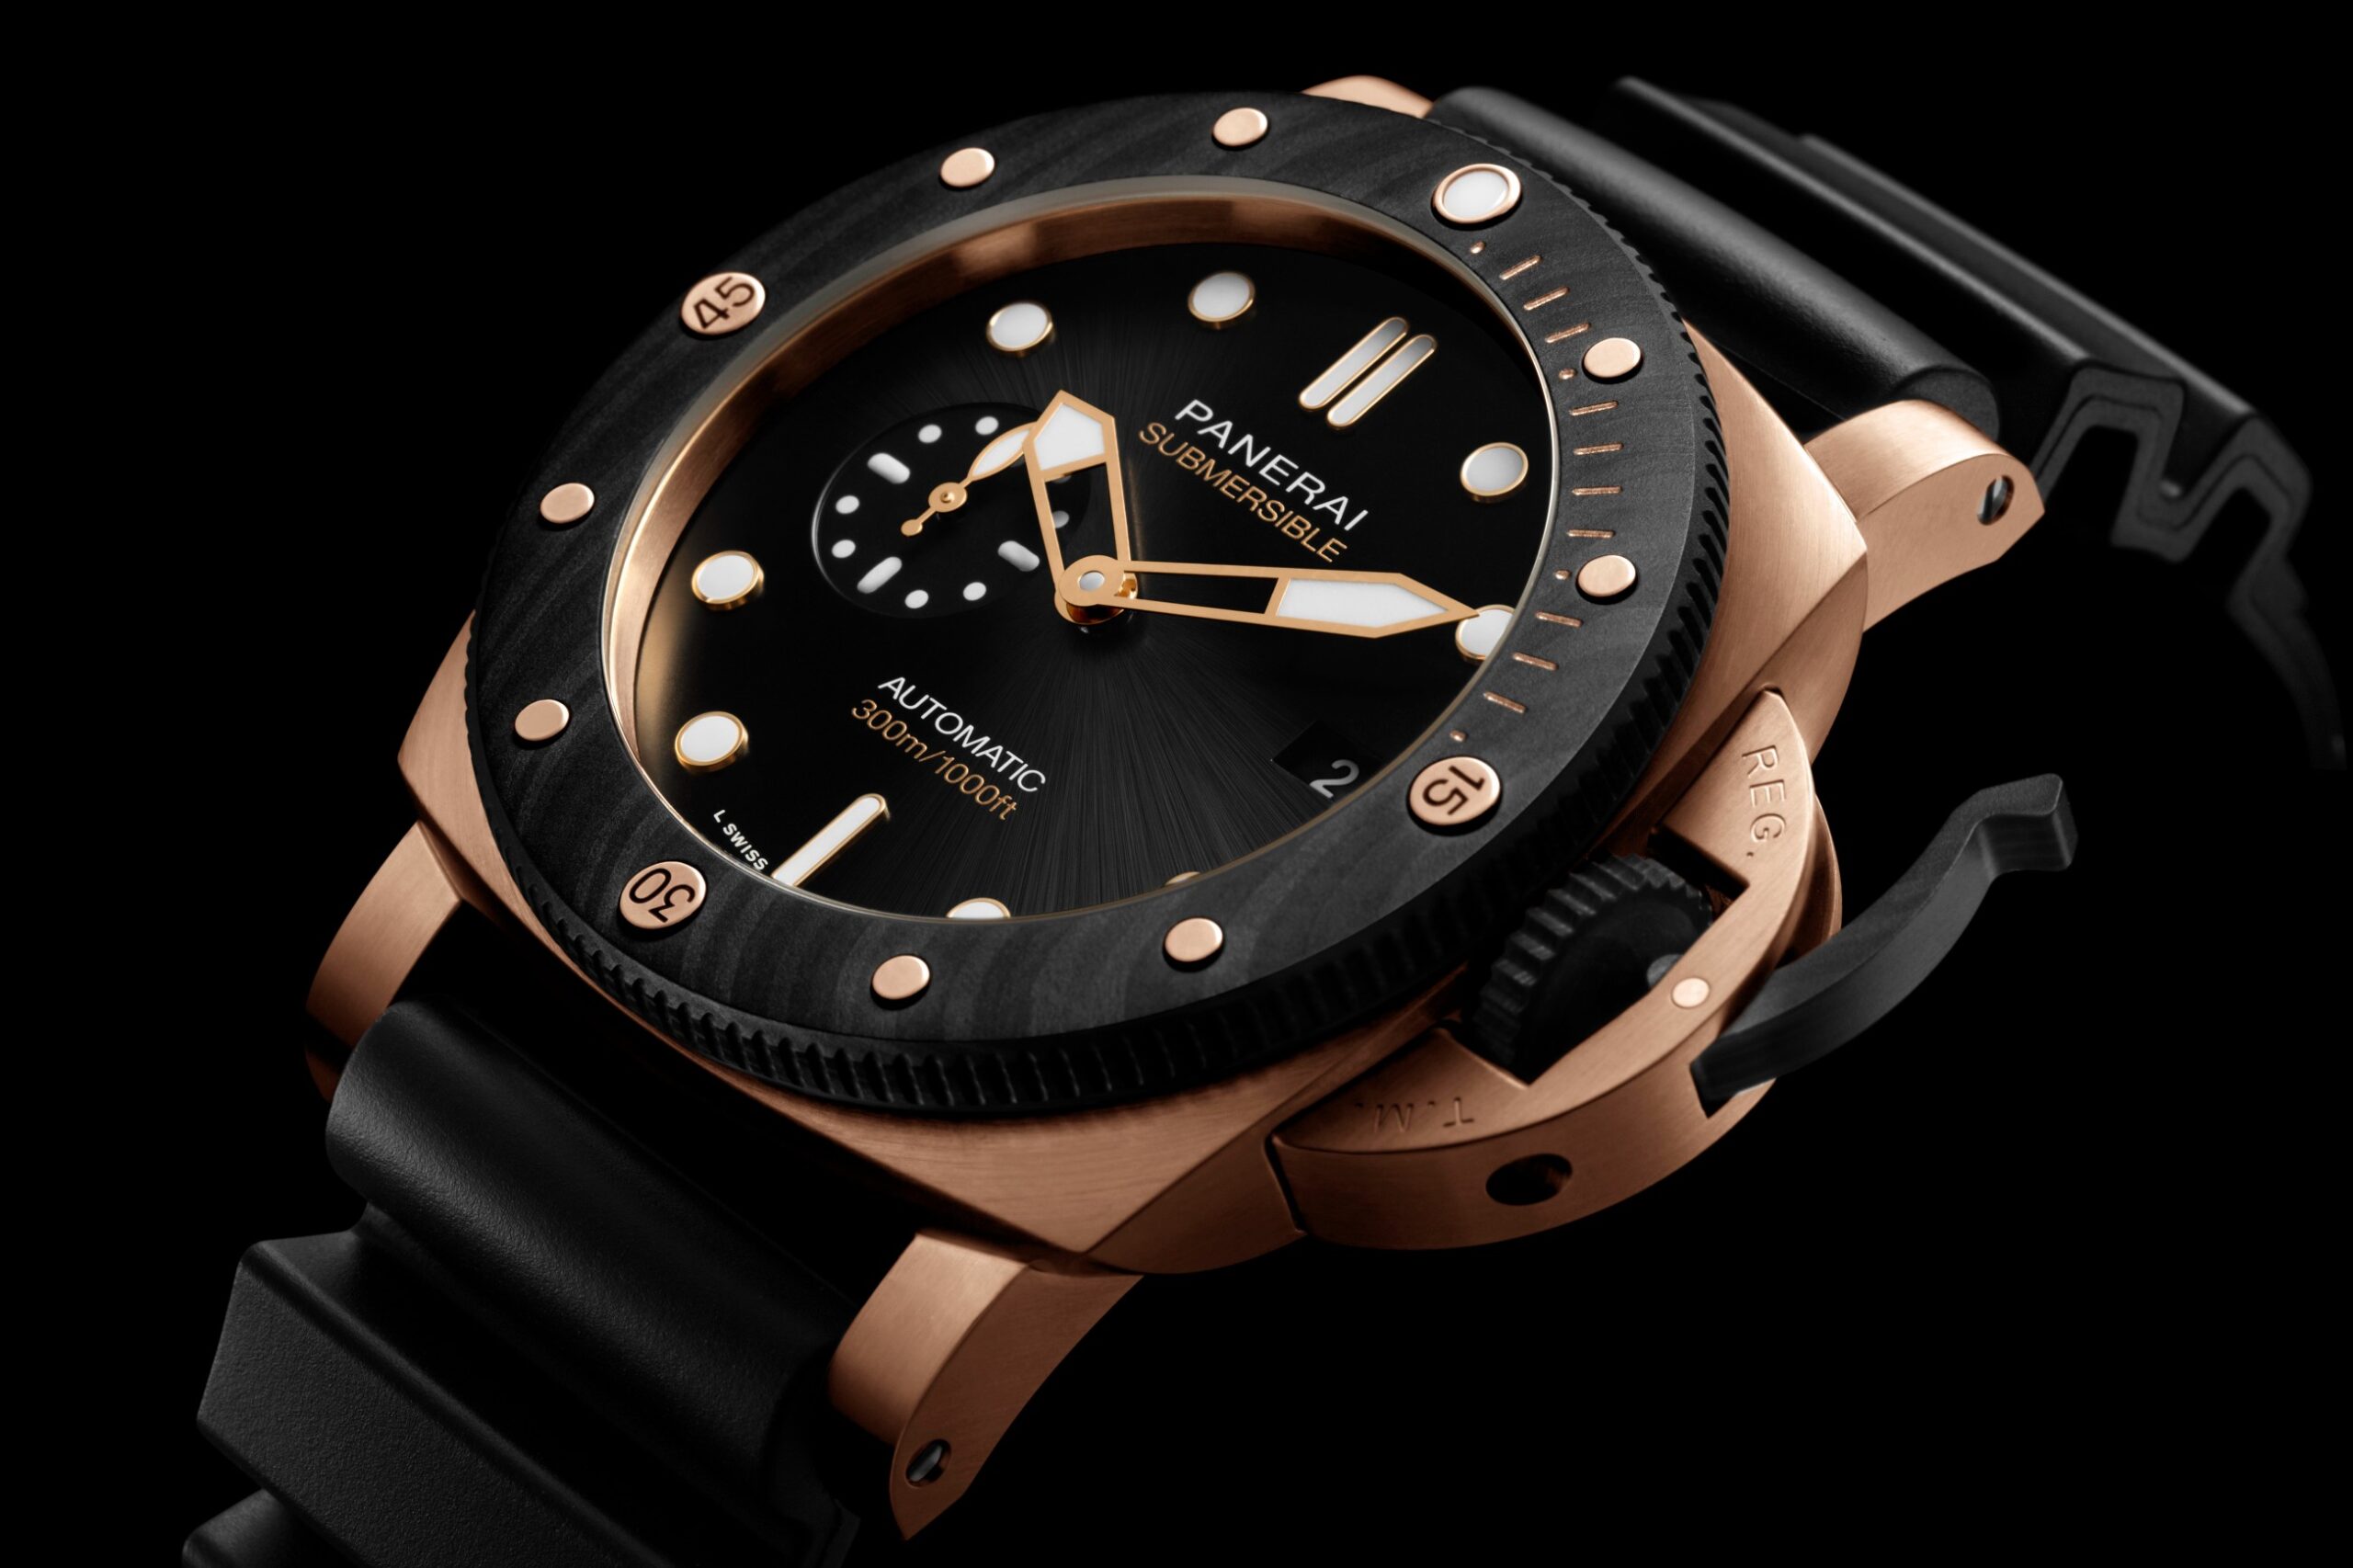 FEATURING: PANERAI - Submersible GoldtechTM Orocarbo – 44mm